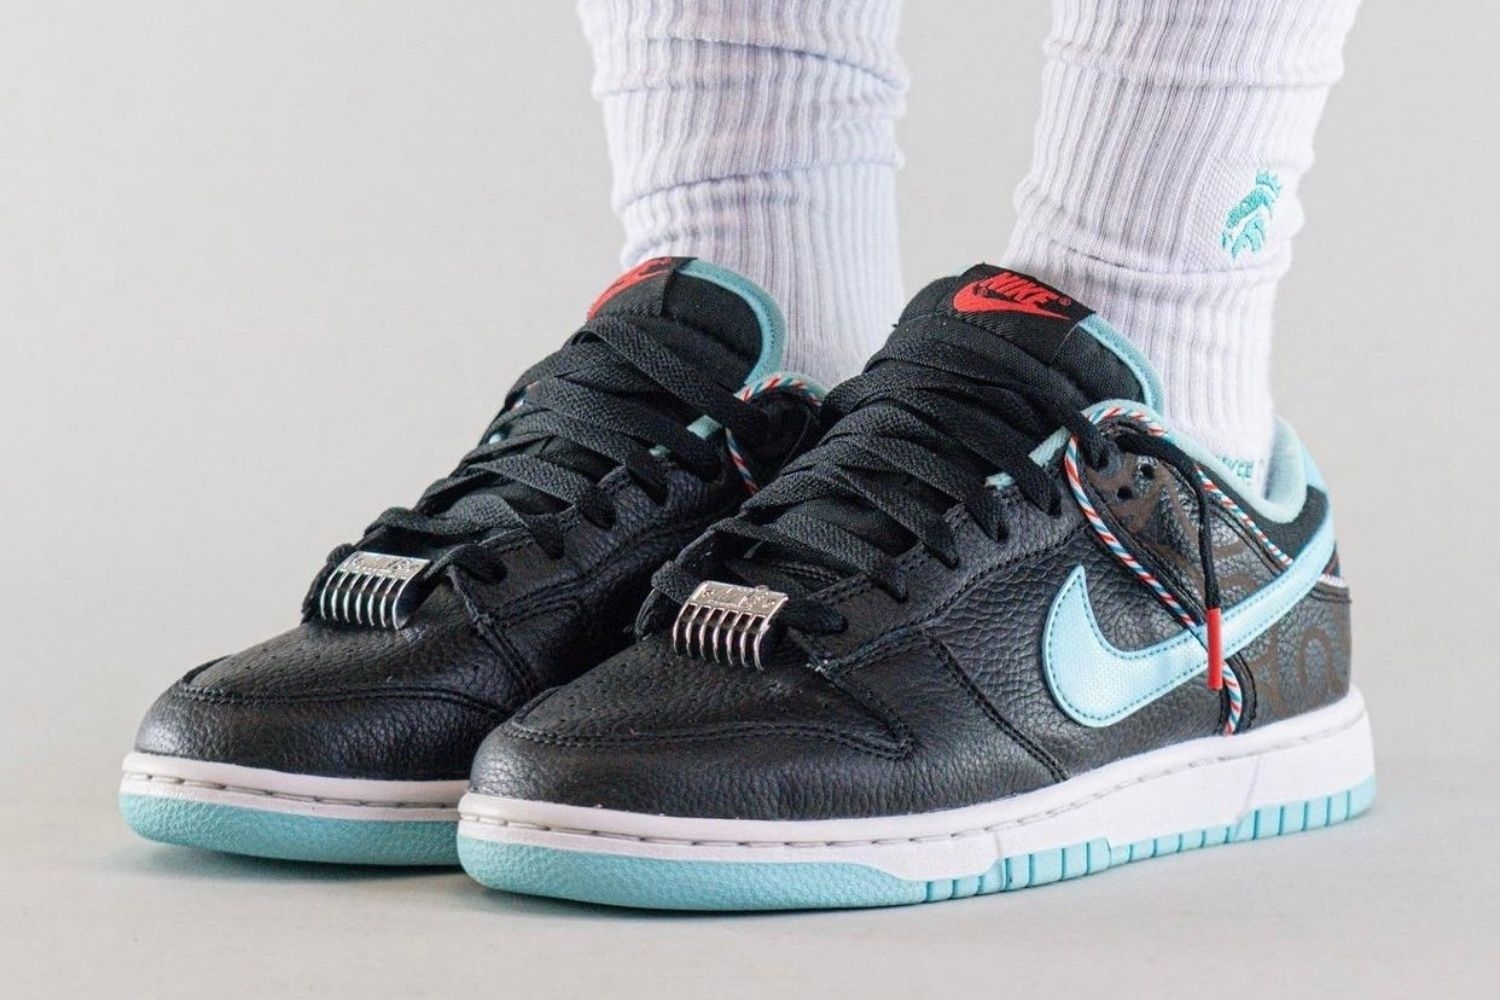 Check out the Nike Dunk Low 'Barber Shop' here